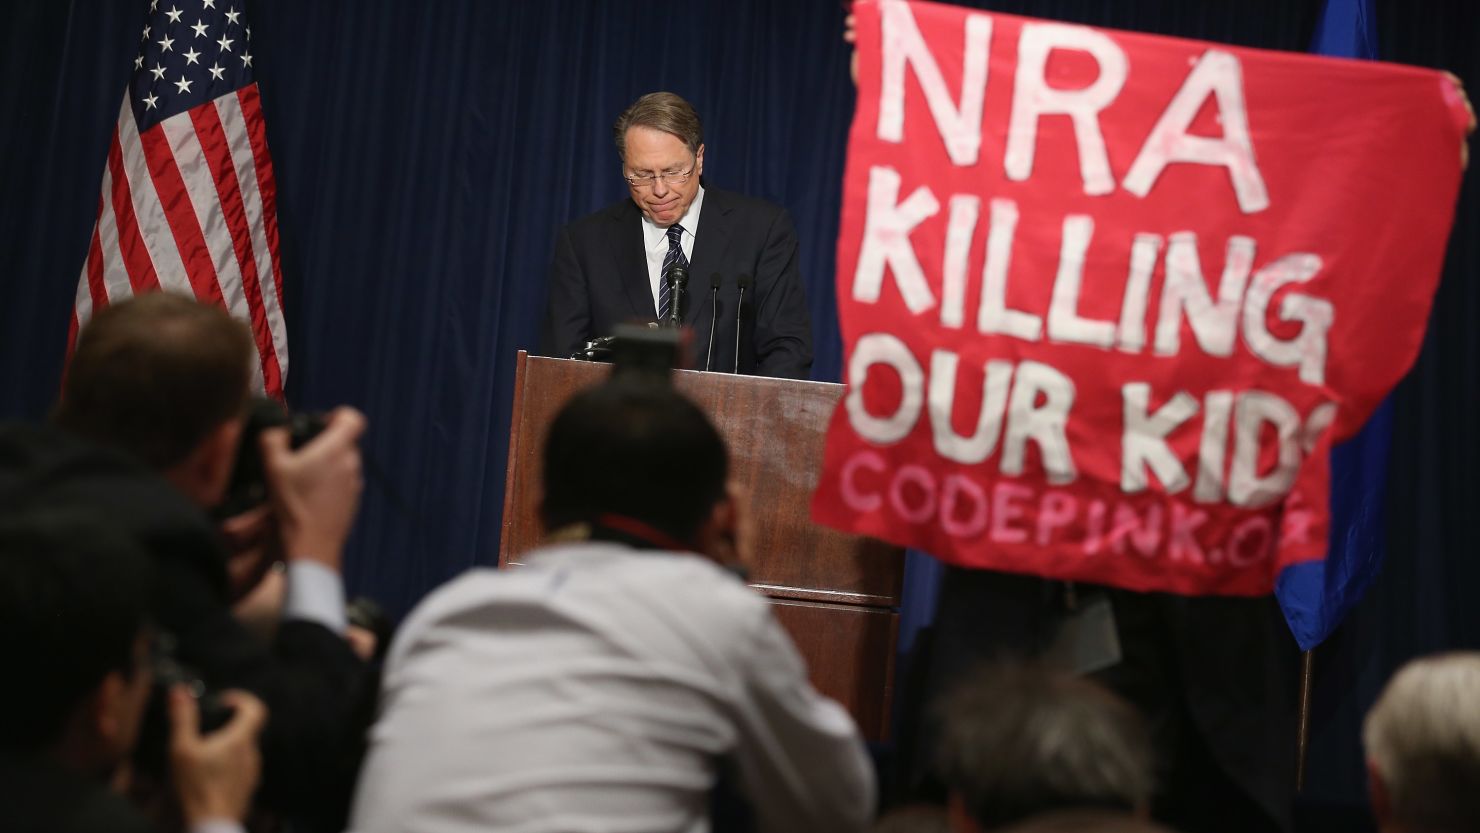 An anti-gun activist holds up a banner as NRA leader Wayne LaPierre talks about the Newtown, Connecticut, school slaughter.